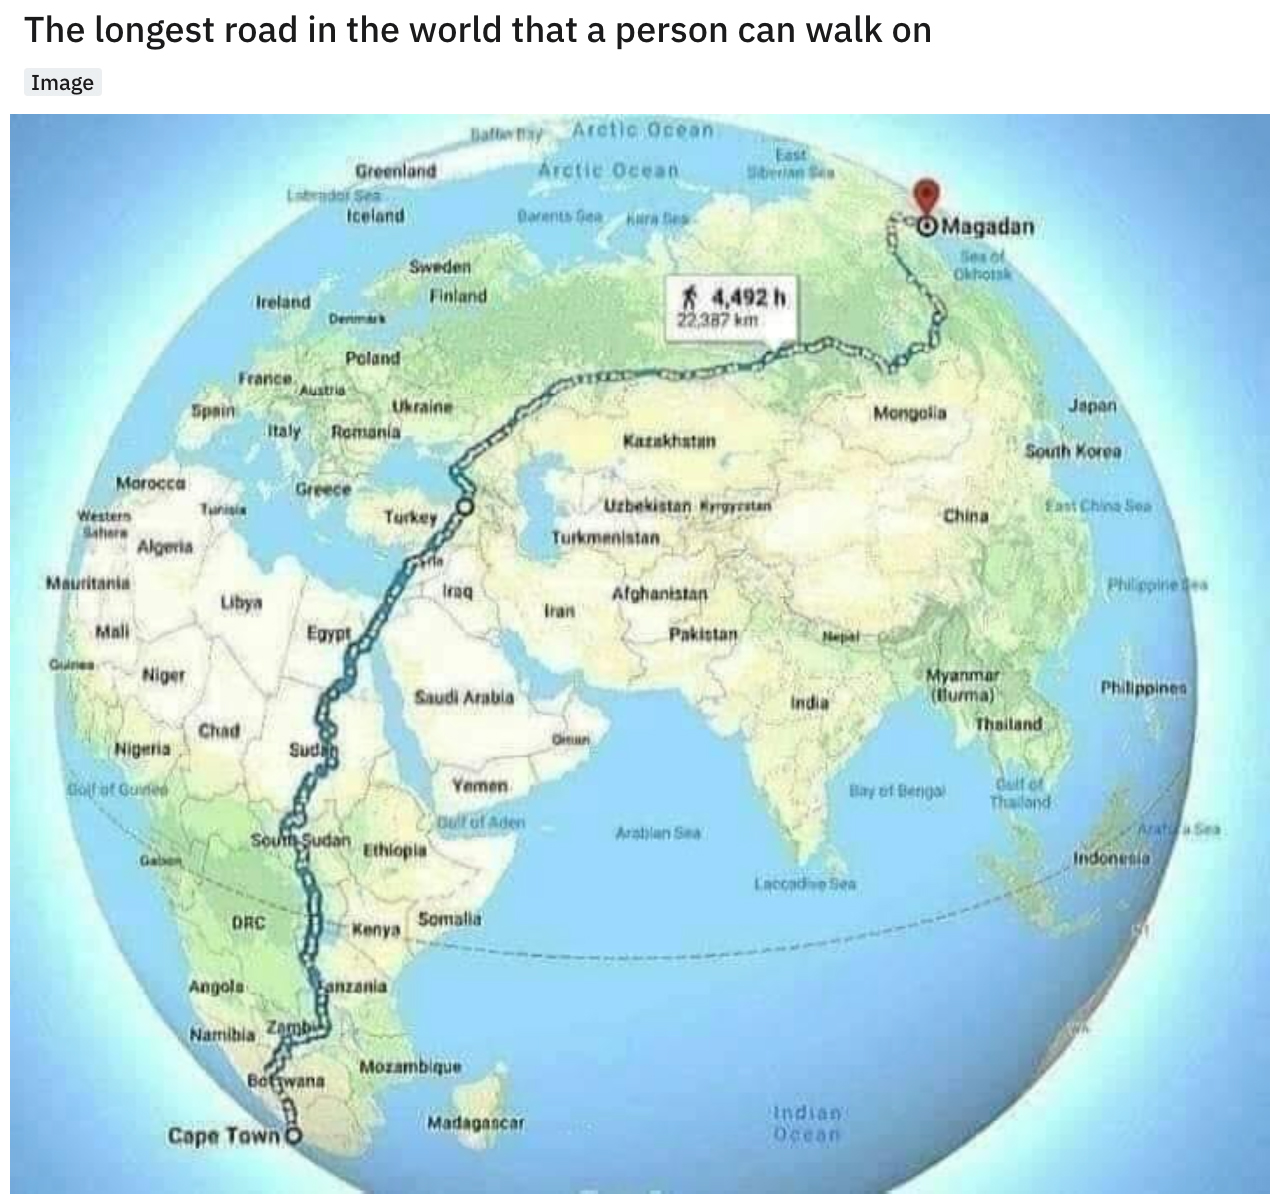 cool facts - The longest road in the world that a person can walk on